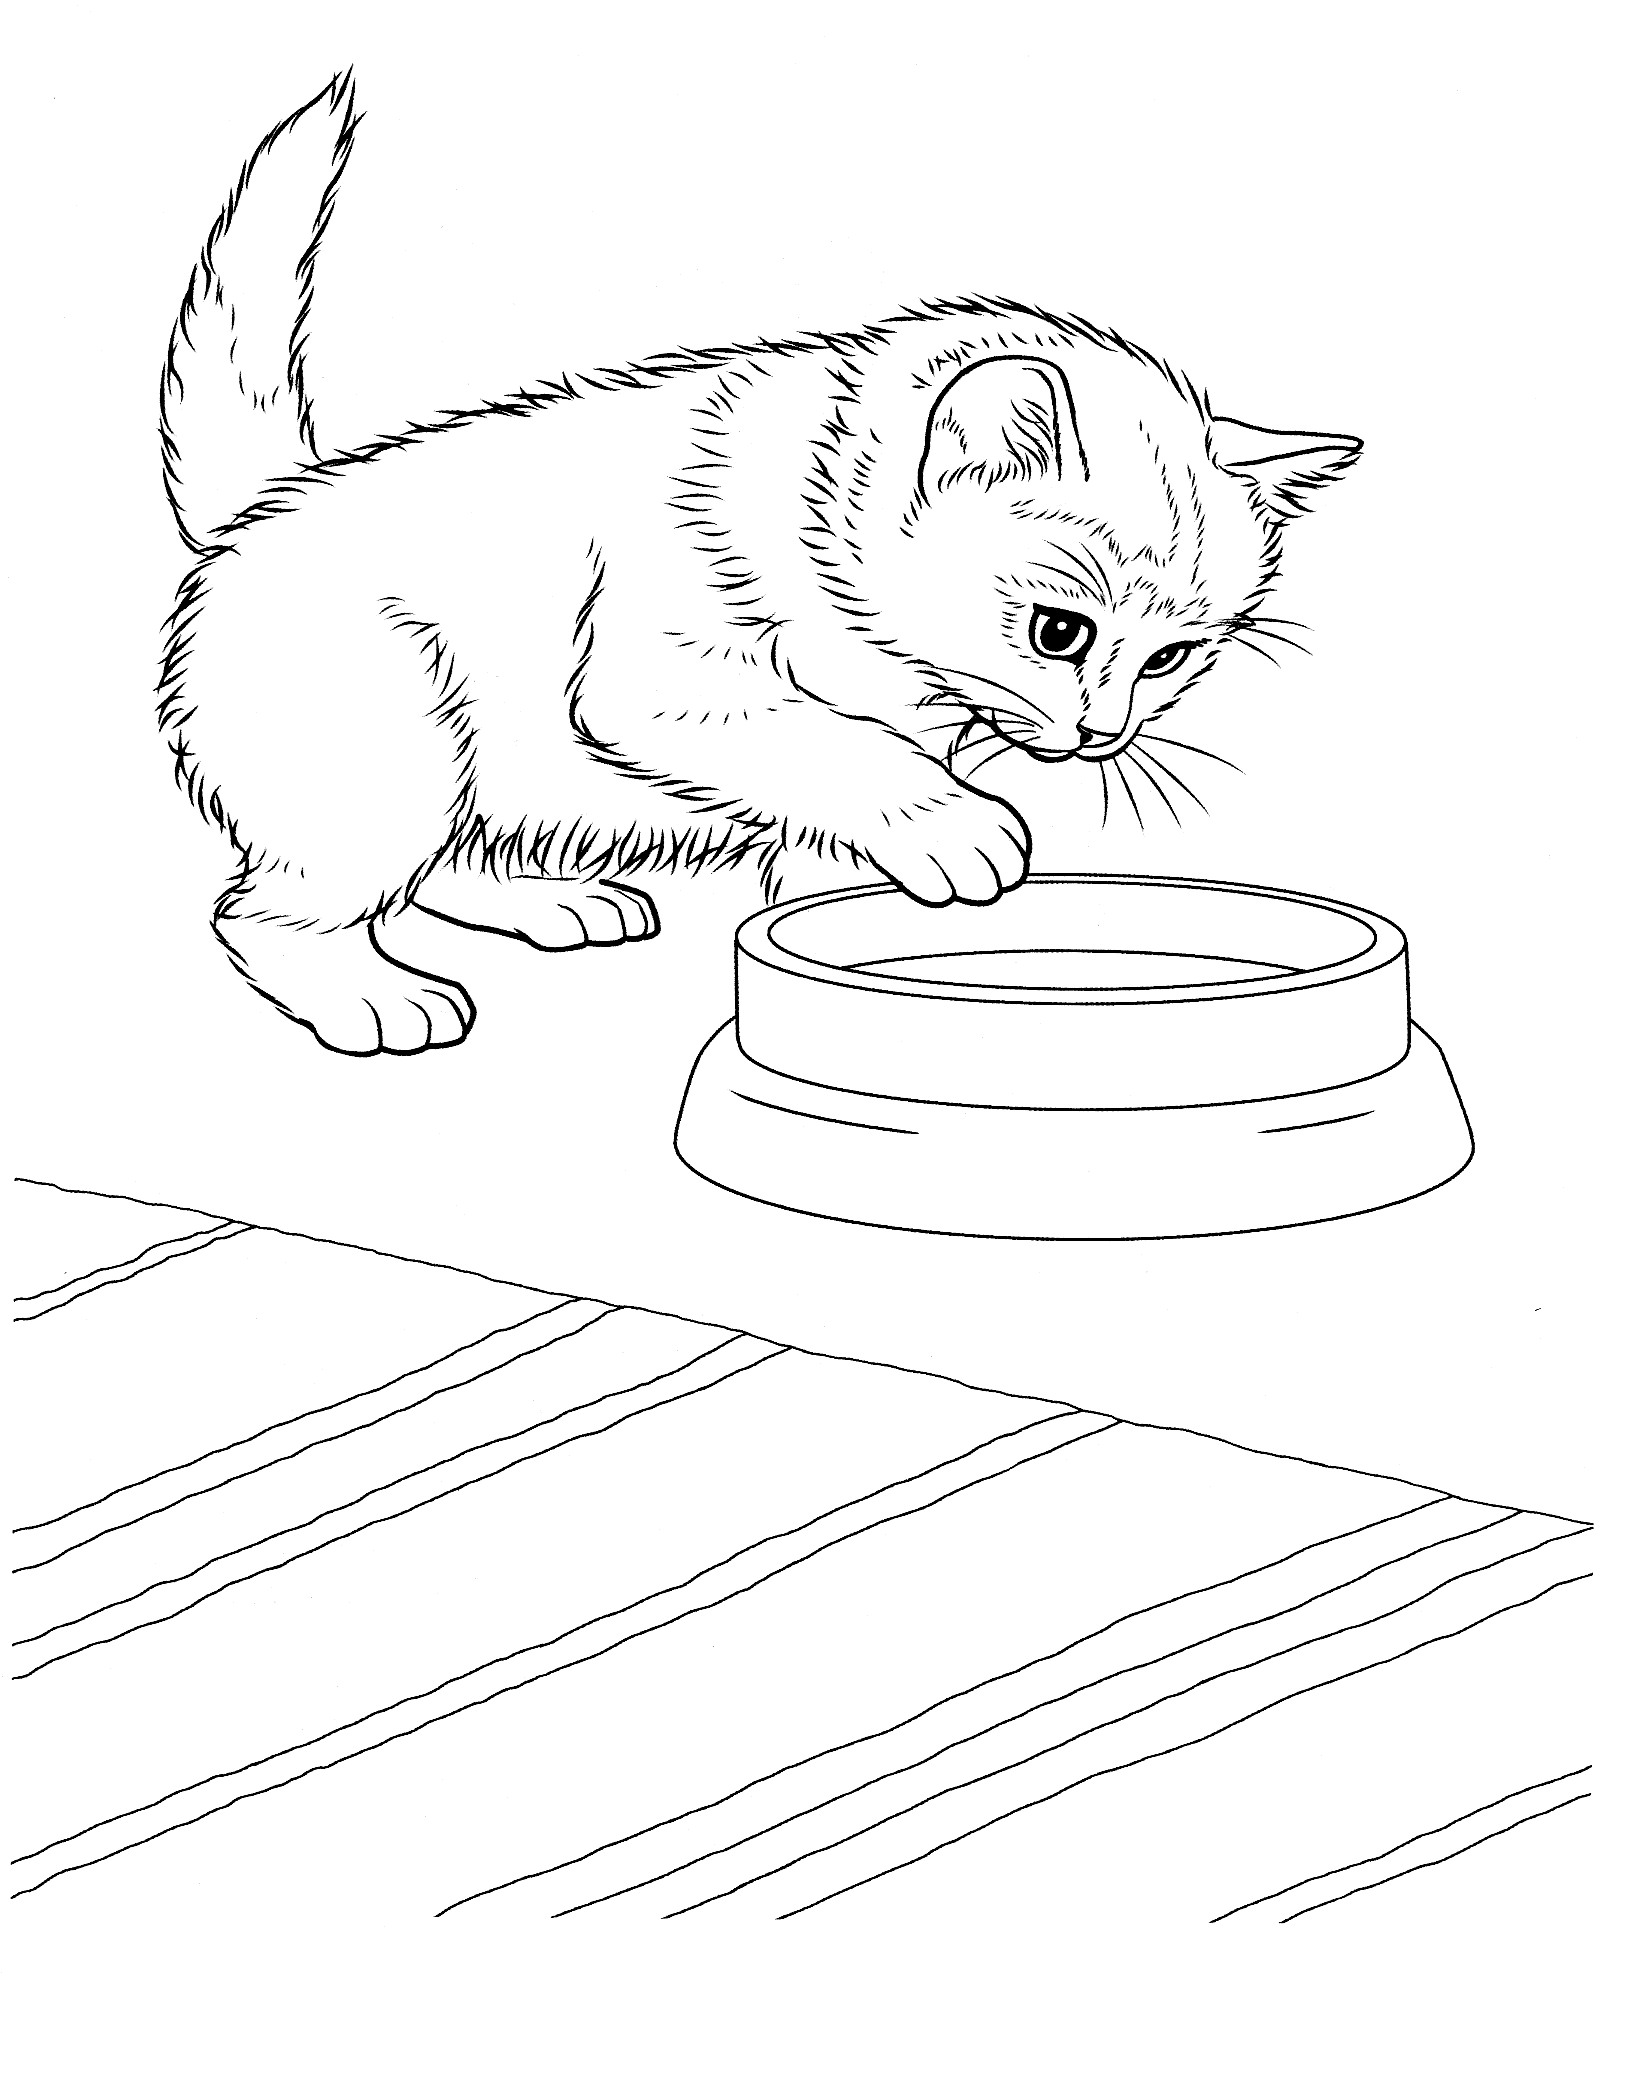 Free Printable Kitten Coloring Pages For Kids Best Coloring Pages For Kids